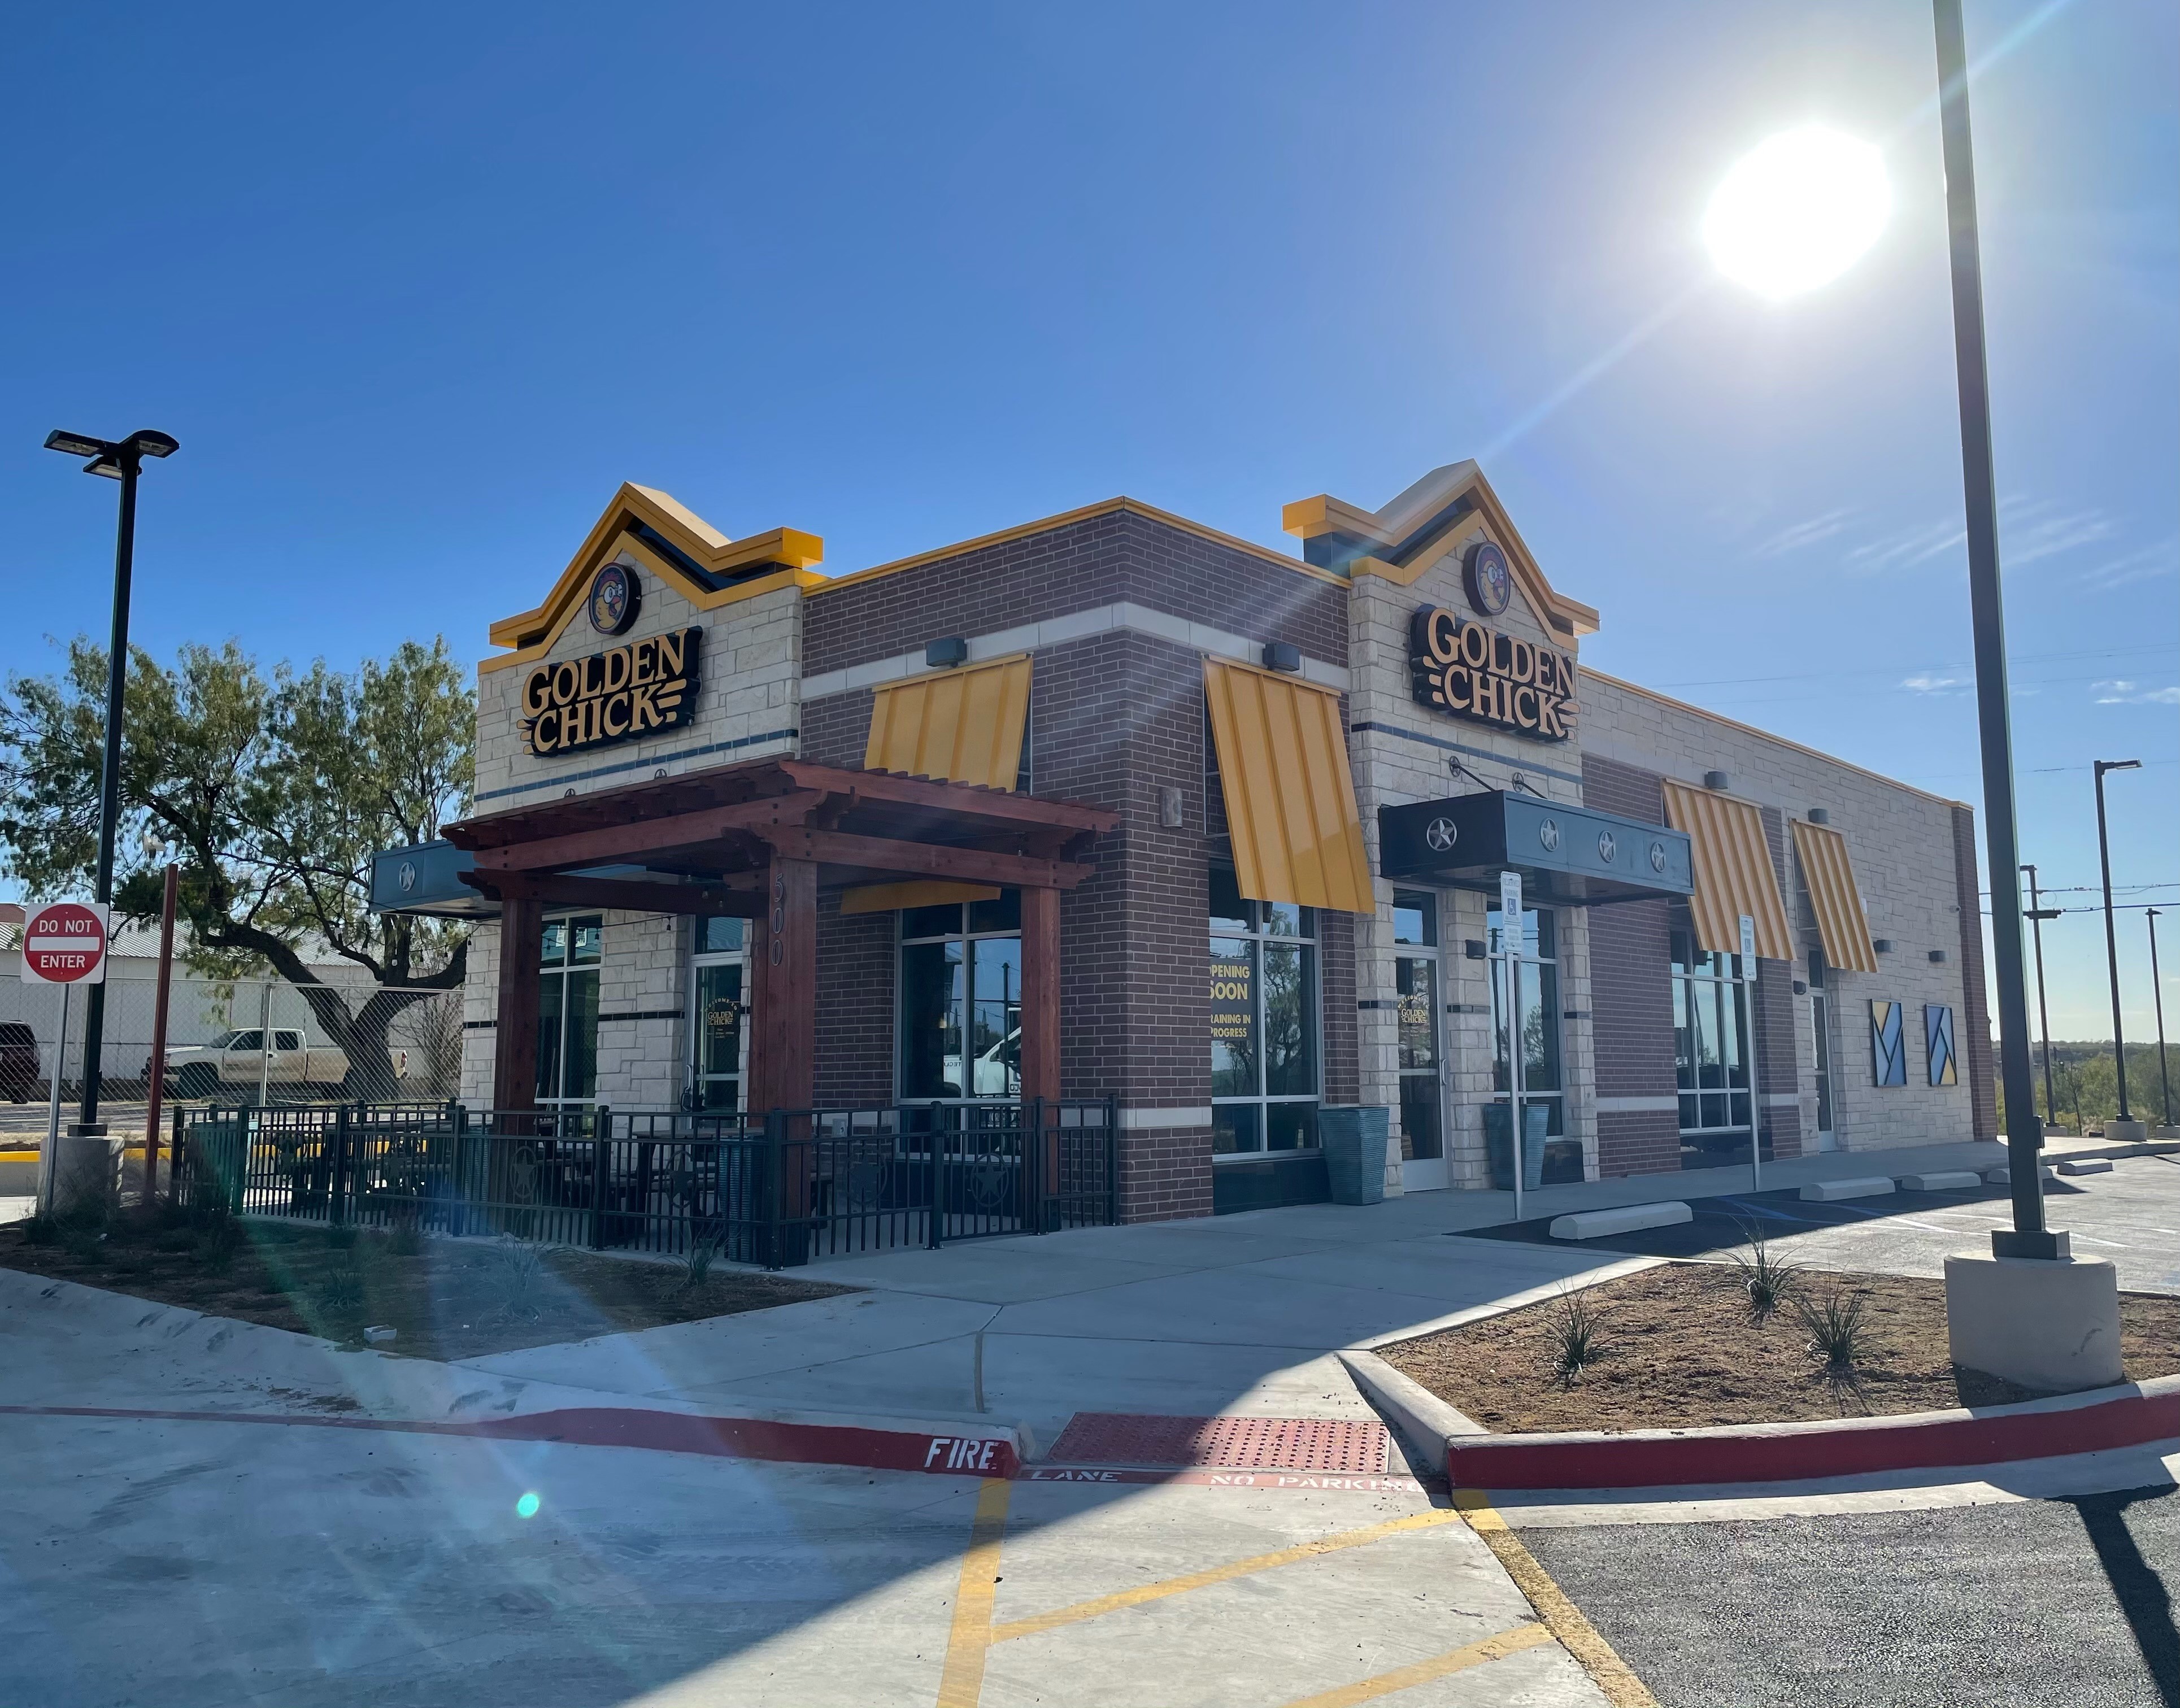 Golden Chick storefront.  Your local Golden Chick fast food restaurant in Big Spring, Texas